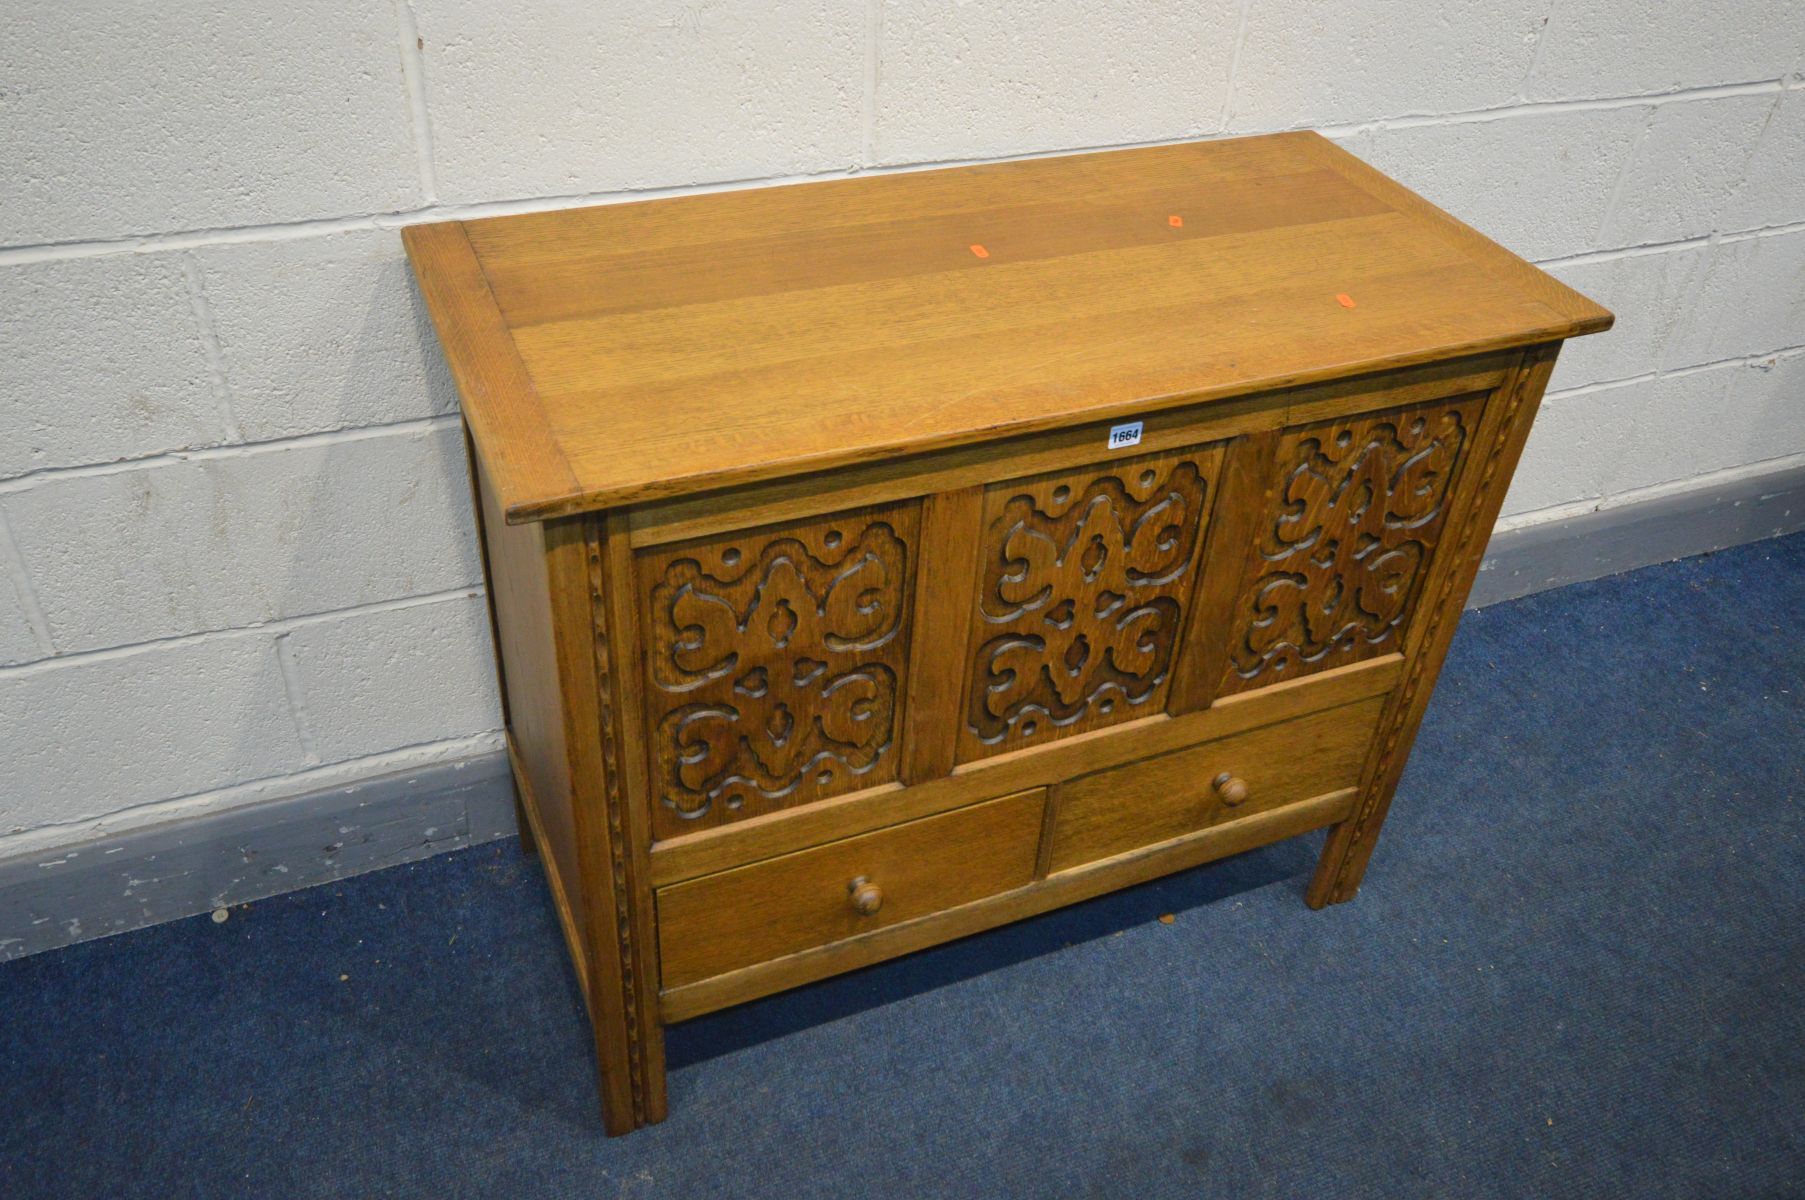 A 'HEATHLAND FURNITURE' OAK MULE CHEST, with blind fretwork detailing to the three front panels - Image 2 of 3